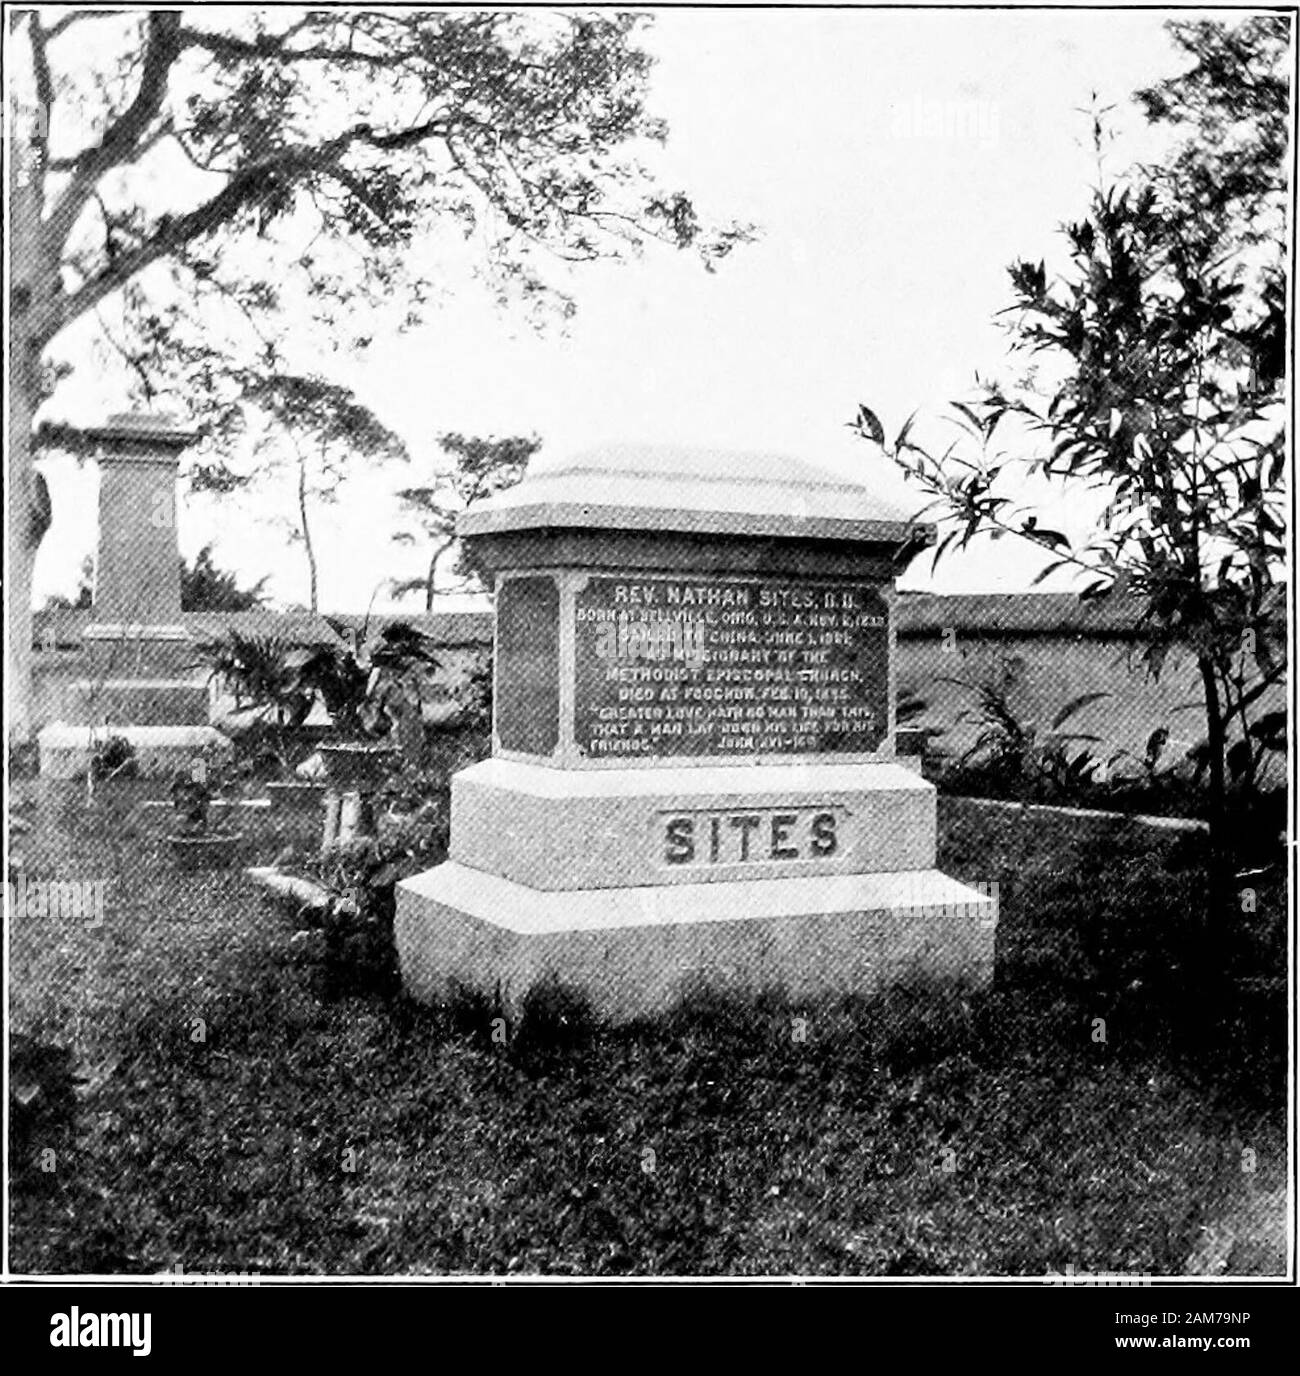 Nathan Sites; an epic of the East . I •a a. The IMission Cemeterv, Foochow. THE HALLELUJAH CHORUS 237 Met him! he cried, his voice trembling withemotion. Had it not been for him I should be abeggar to-day. It was he who saved my fatherfrom opium, away down in Clearwater, yearsago. A few days later, the father, a fine old gentle-man, a respected teacher in the boys school atClearwater, called to see me. The tendernesswith which he spoke of his winning to God wasbeautiful. Some months after Teacher Sites returnedto heaven, he said, I was taken seriously ill.The native doctor said I must take opi Stock Photo